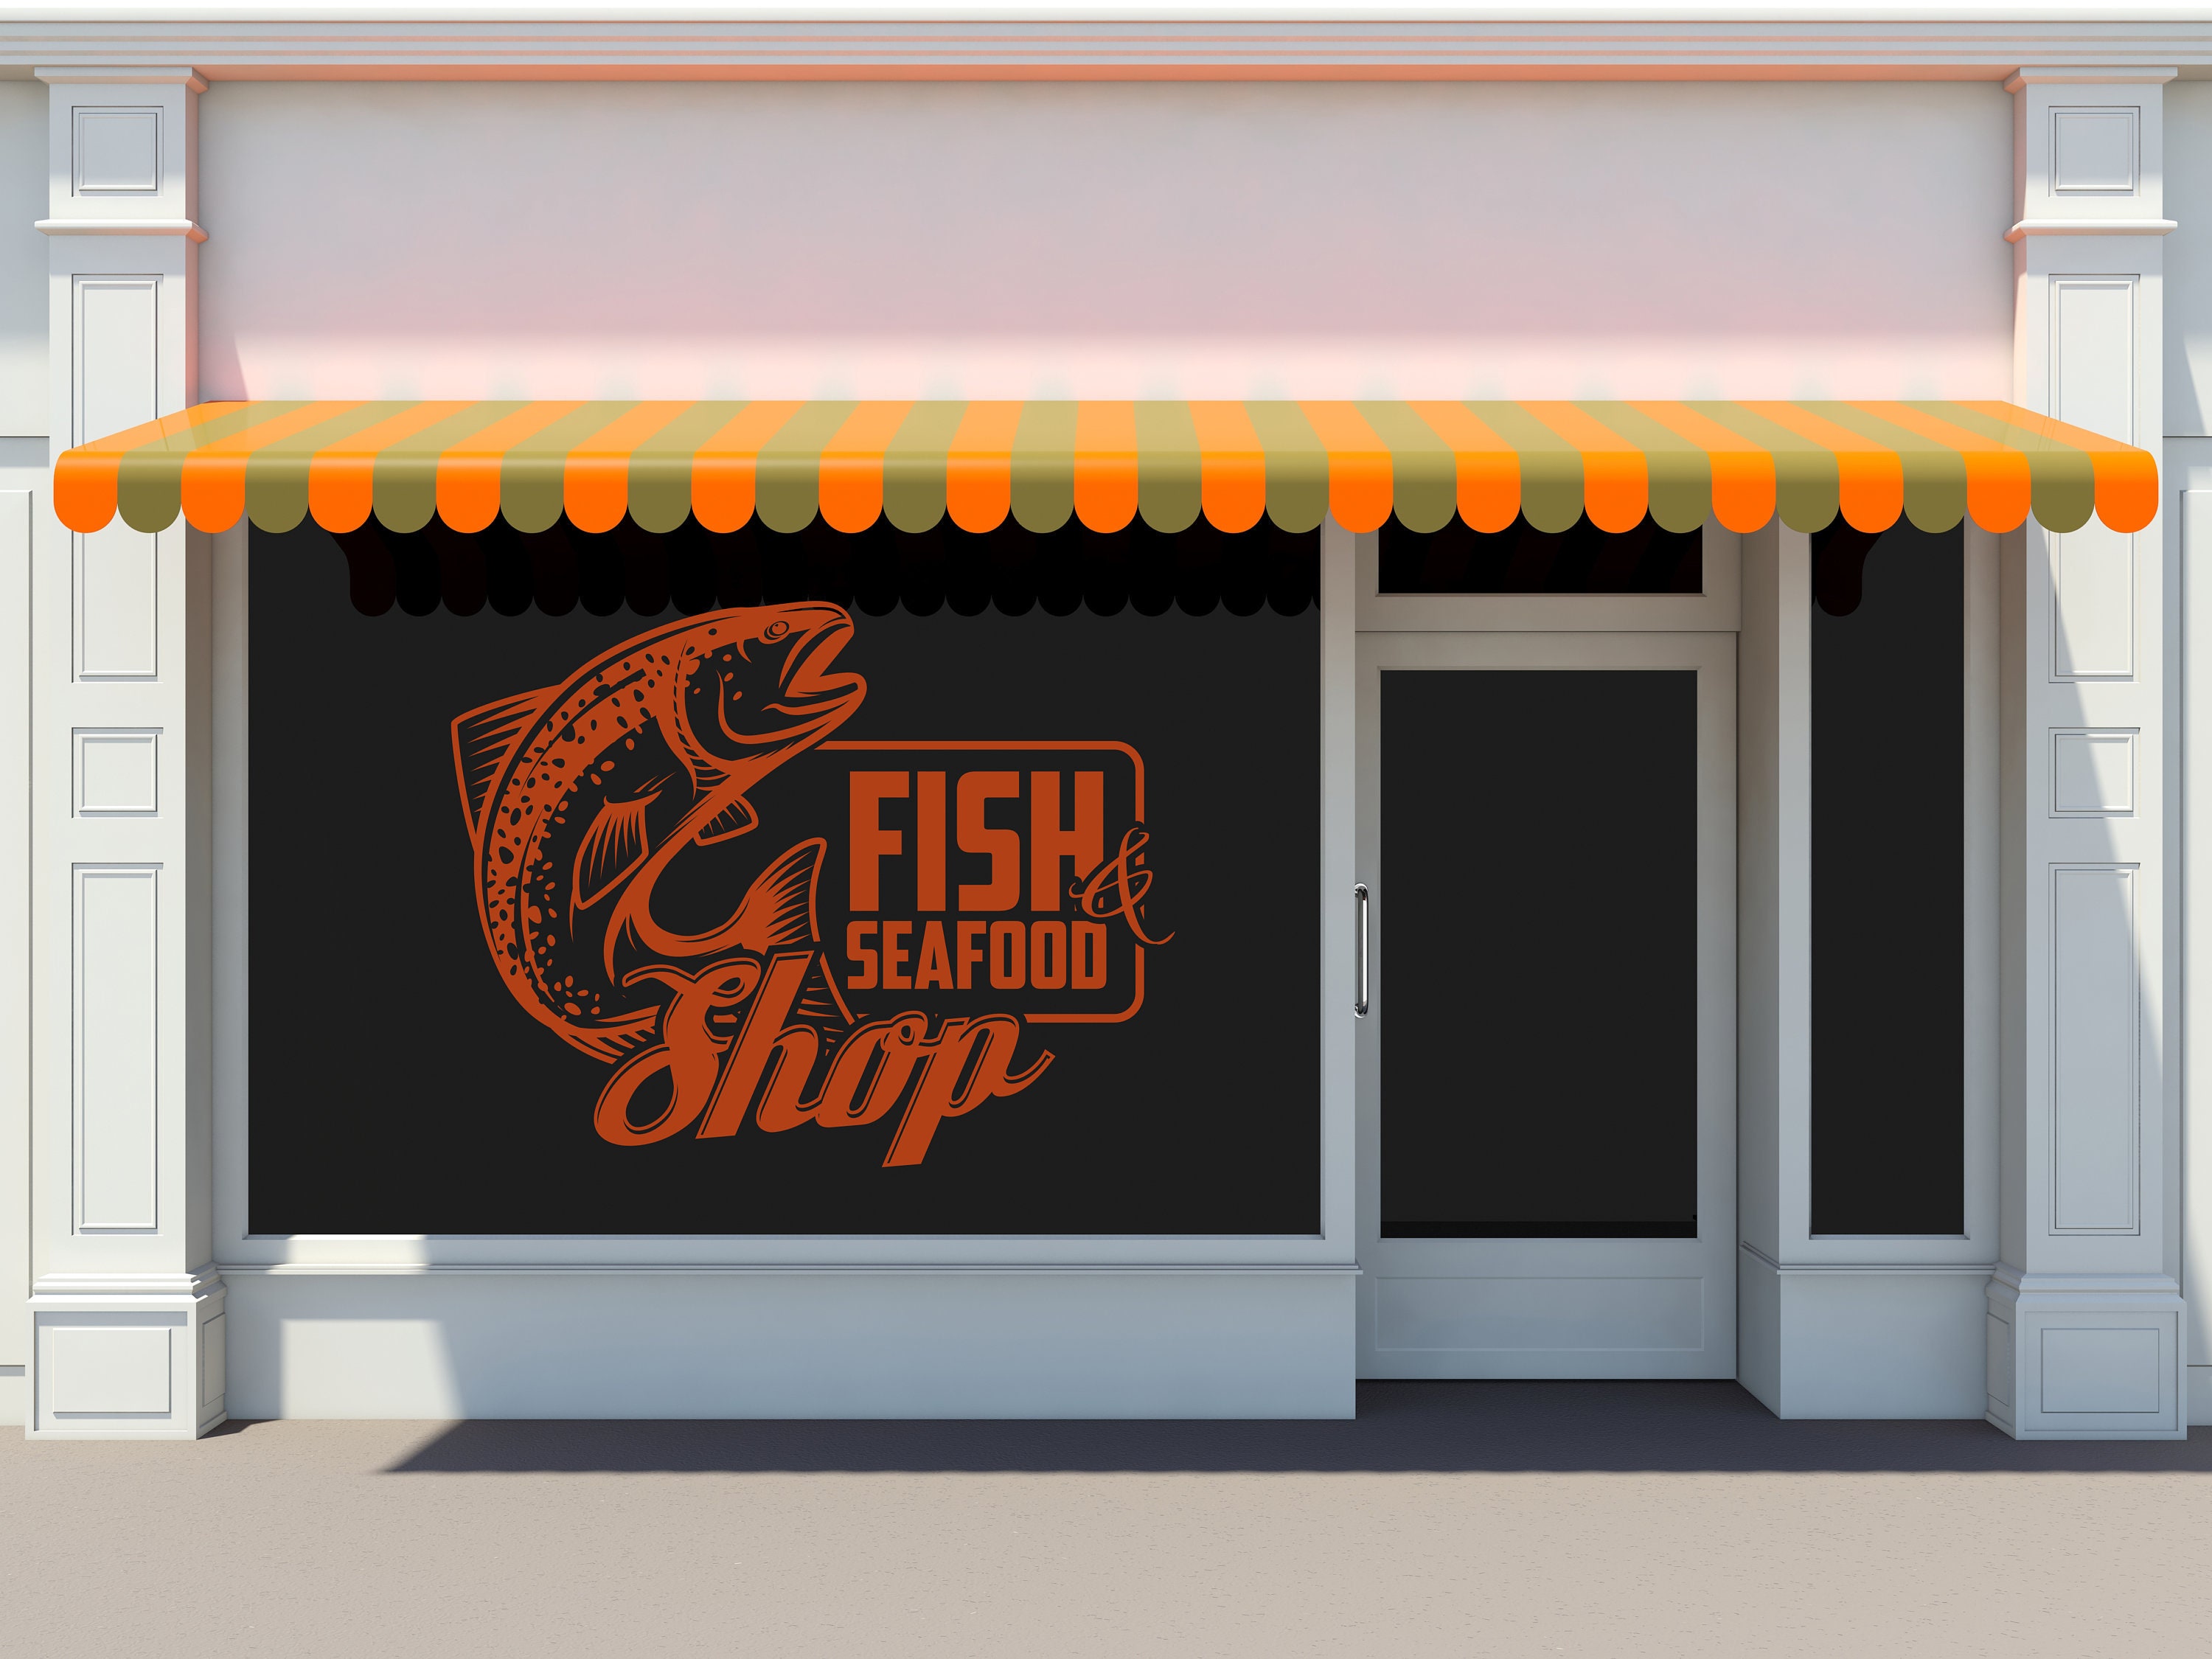 Seafood Wall Decal Fish Shop Decal Seafood Lovers Wall Decal Best Cooking Seafood Restaurant Amazing Food Fish Shop Window Decal CK0236